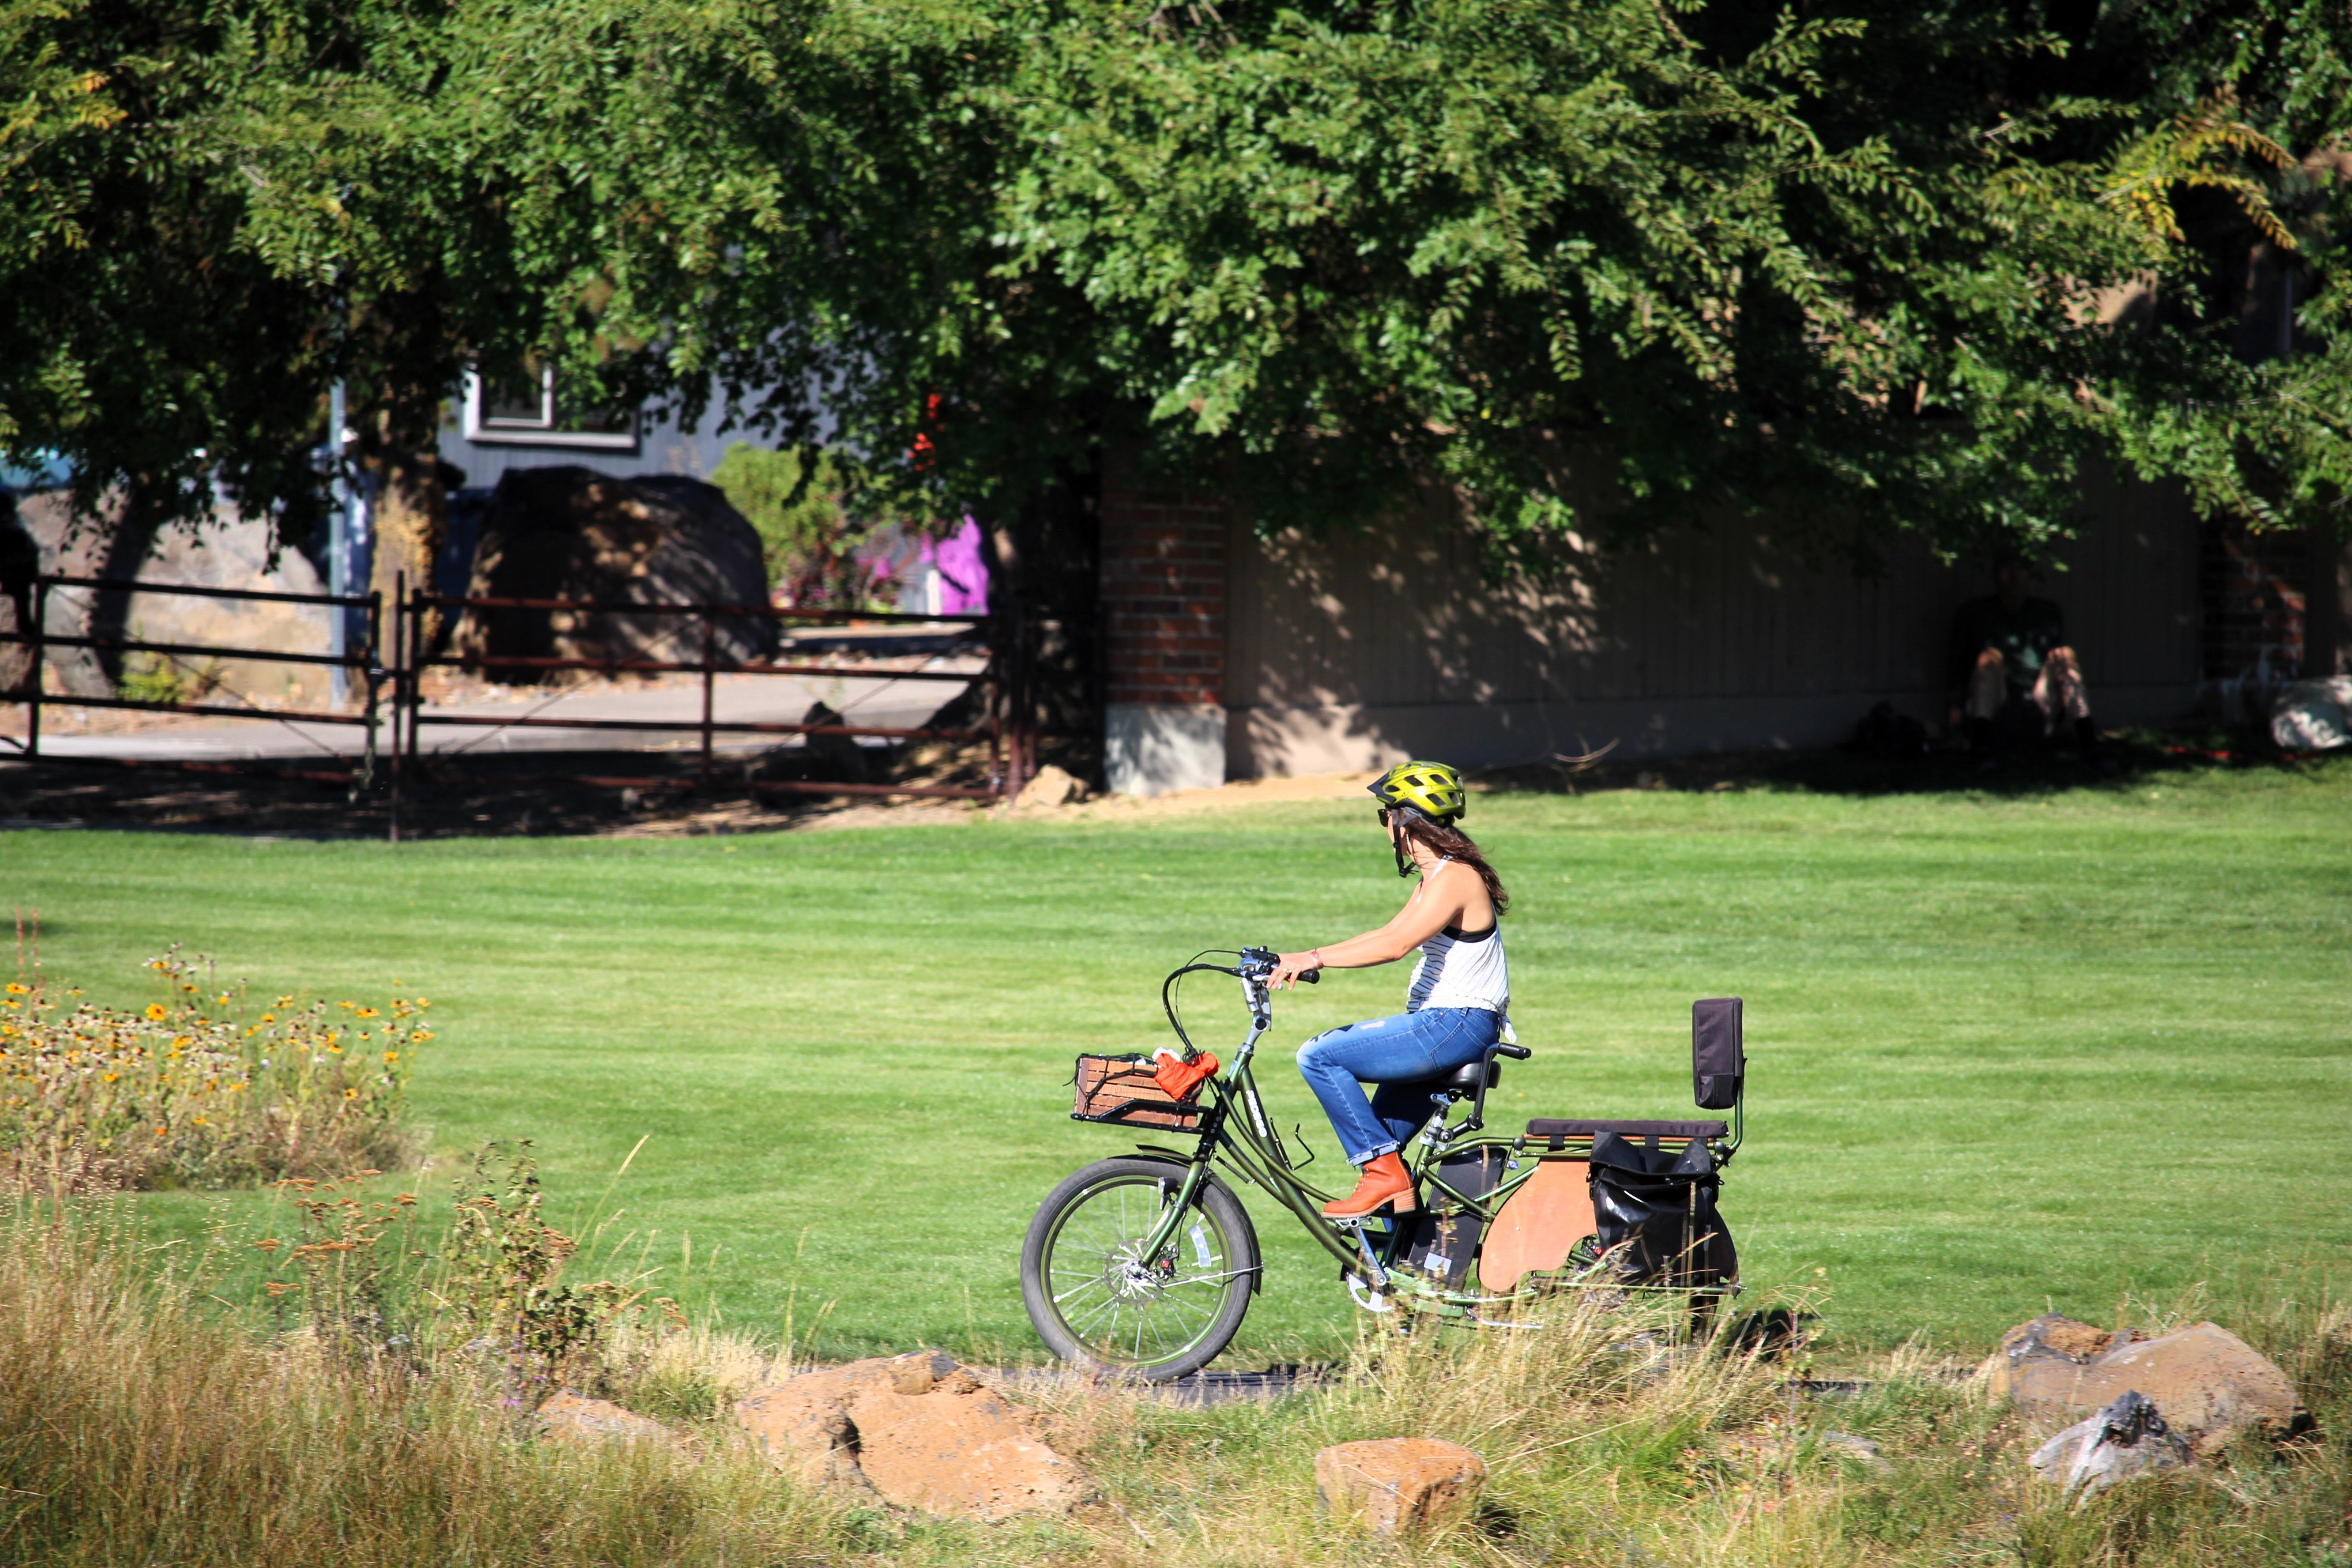 a patrons rides their bike on the trail through millers park